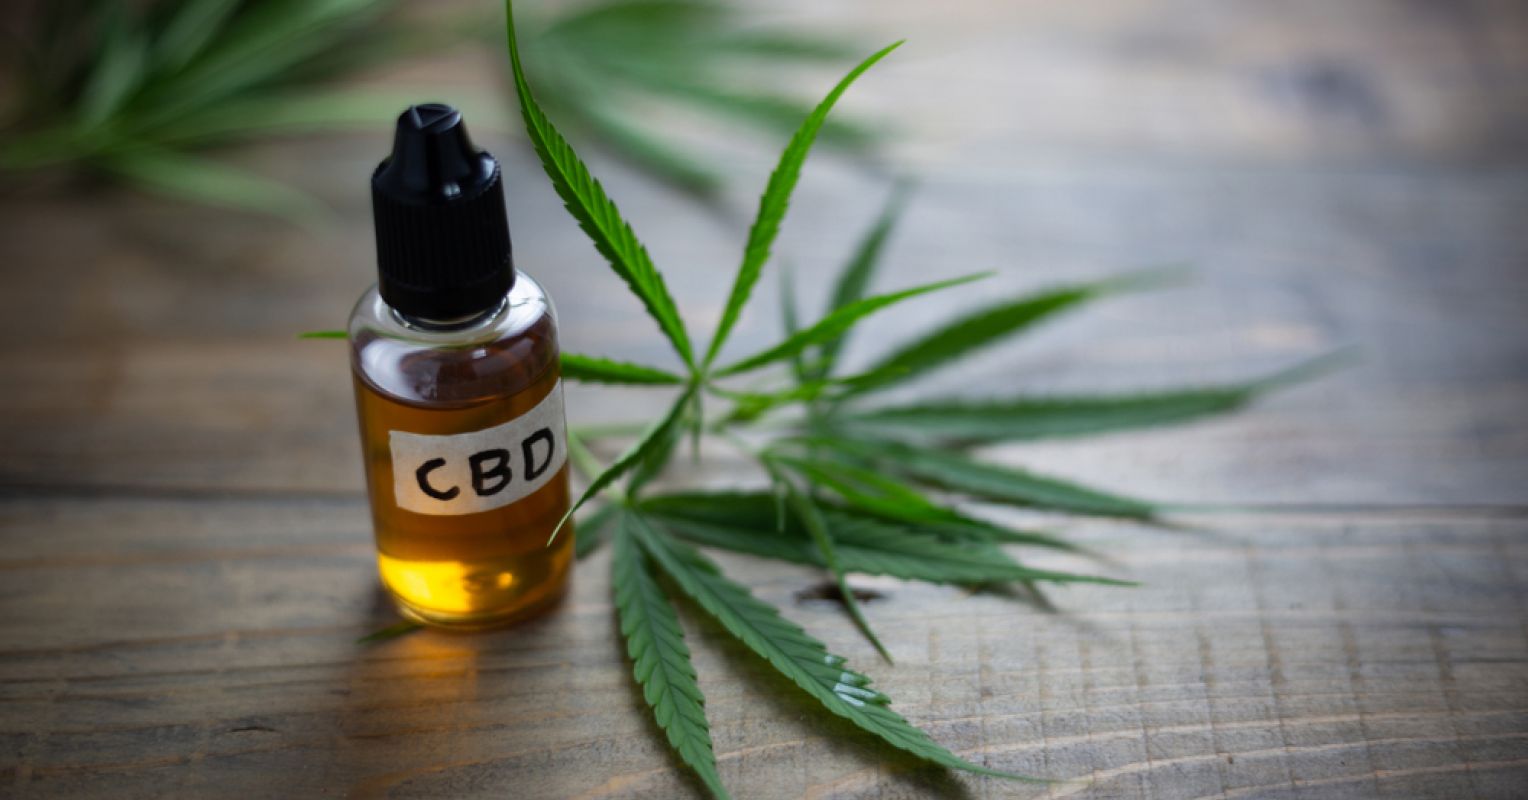 Top 7 Most Effective CBD Marketing Strategies To Increase Sales